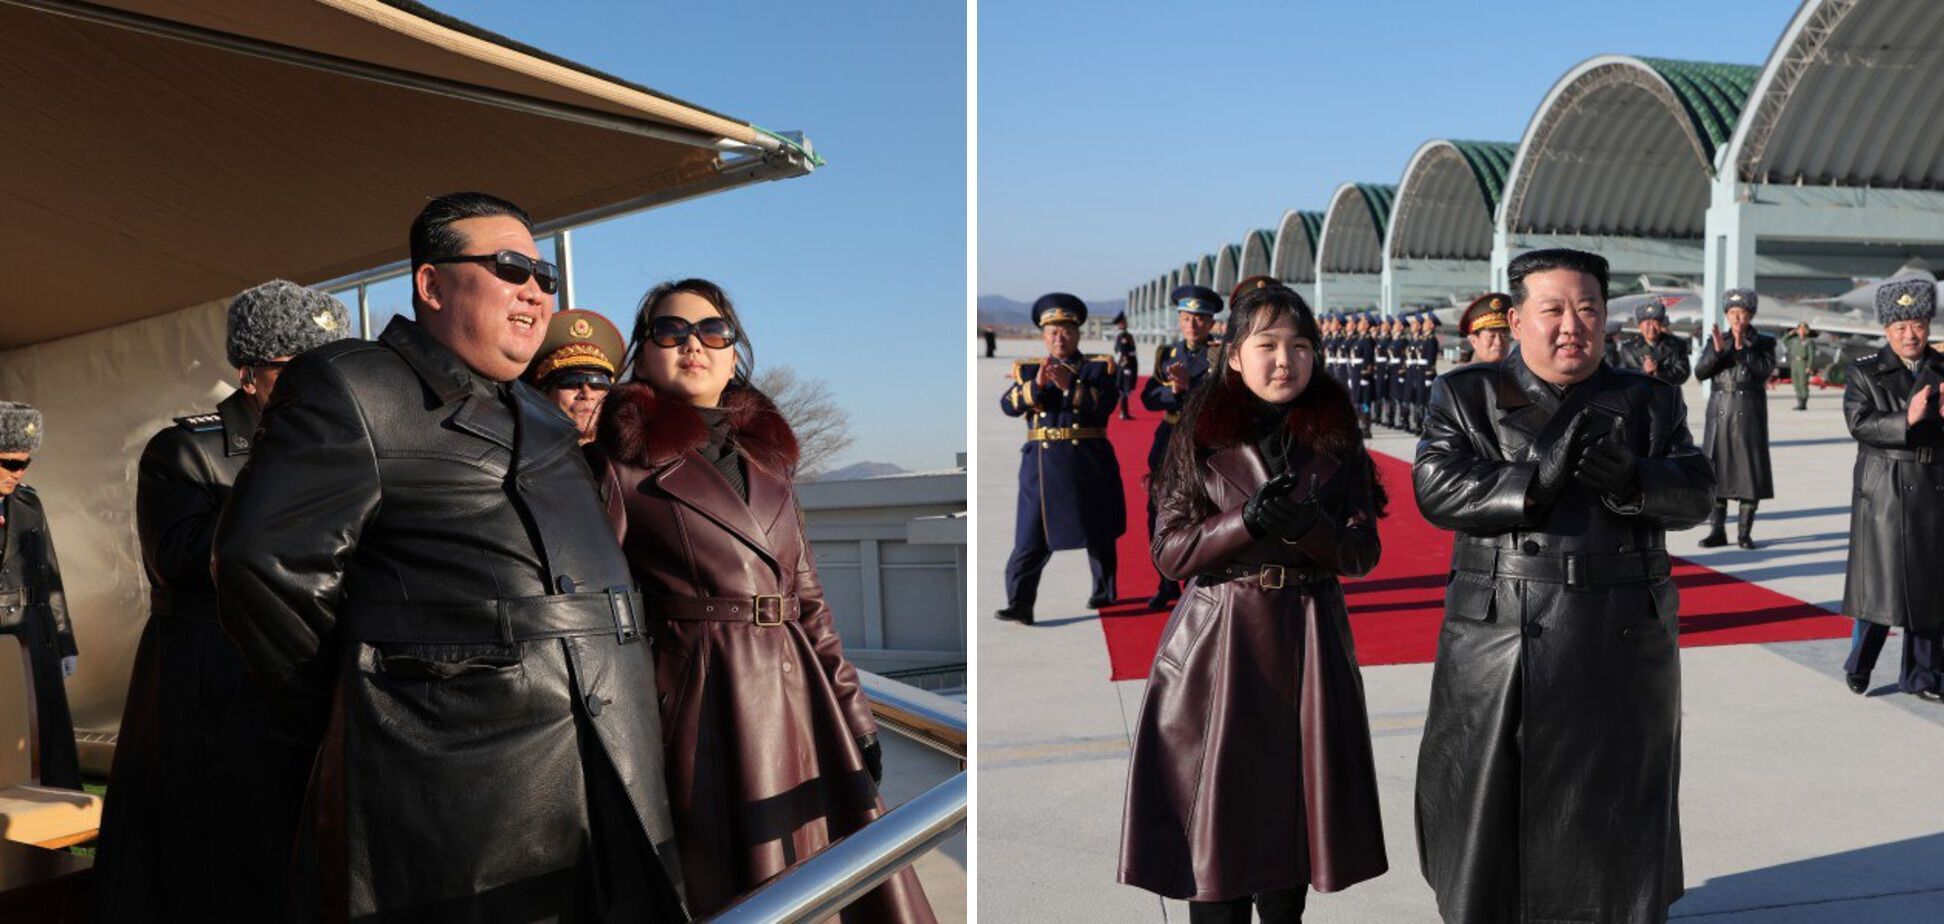 Kim Jong-un's 10-year-old daughter goes out in public with her father again: the DPRK leader in a leather cloak holds her hand